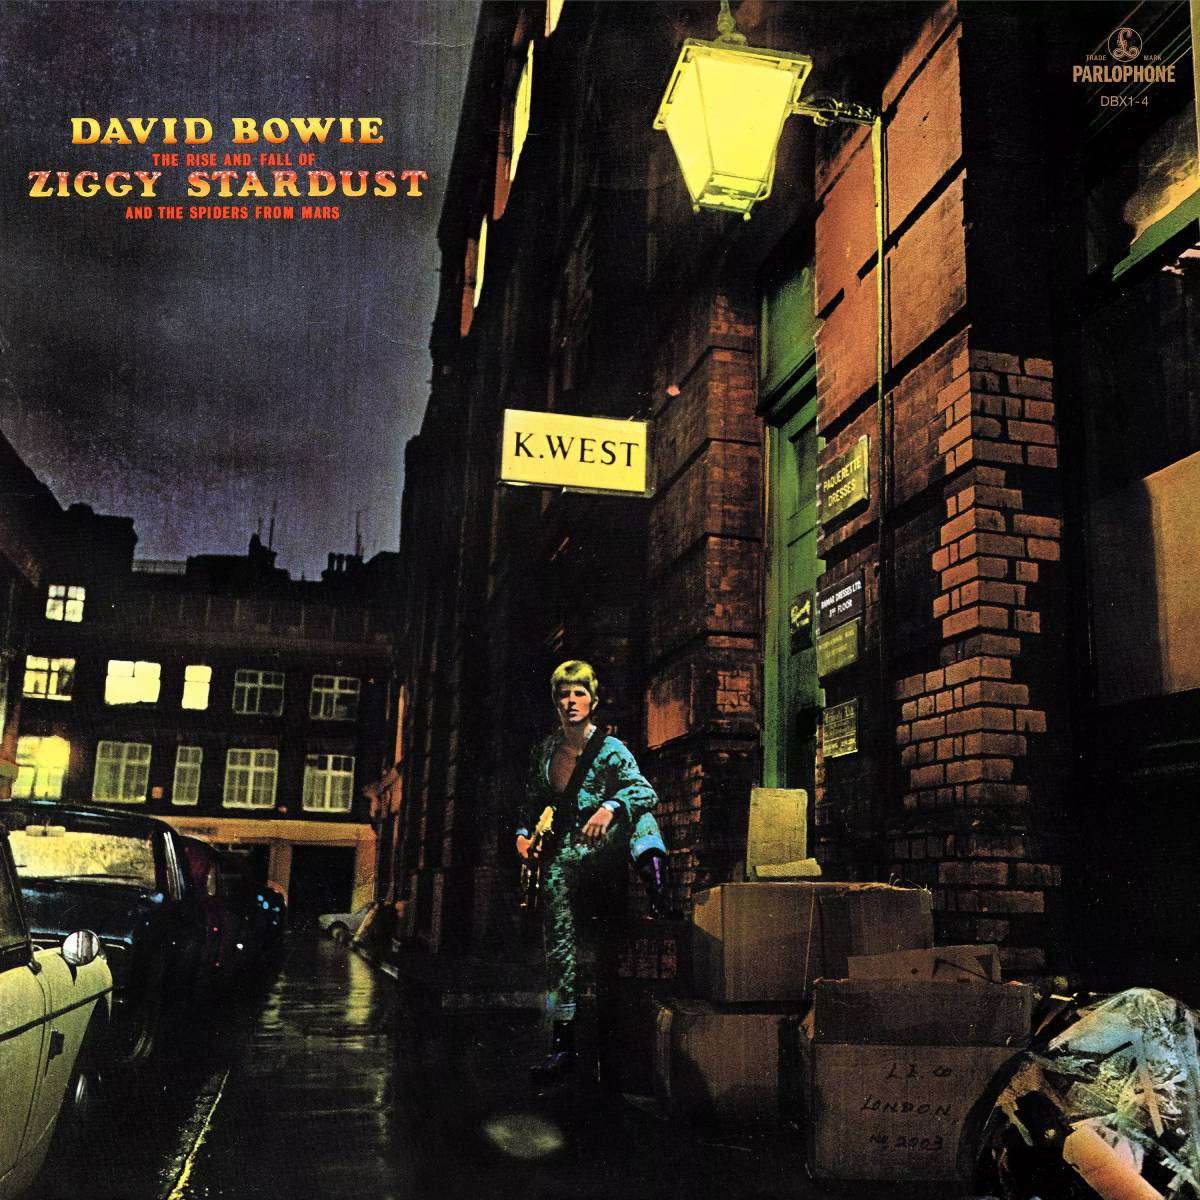 Cover of David Bowie's album The Rise And Fall Of Ziggy Stardust And The Spiders From Mars